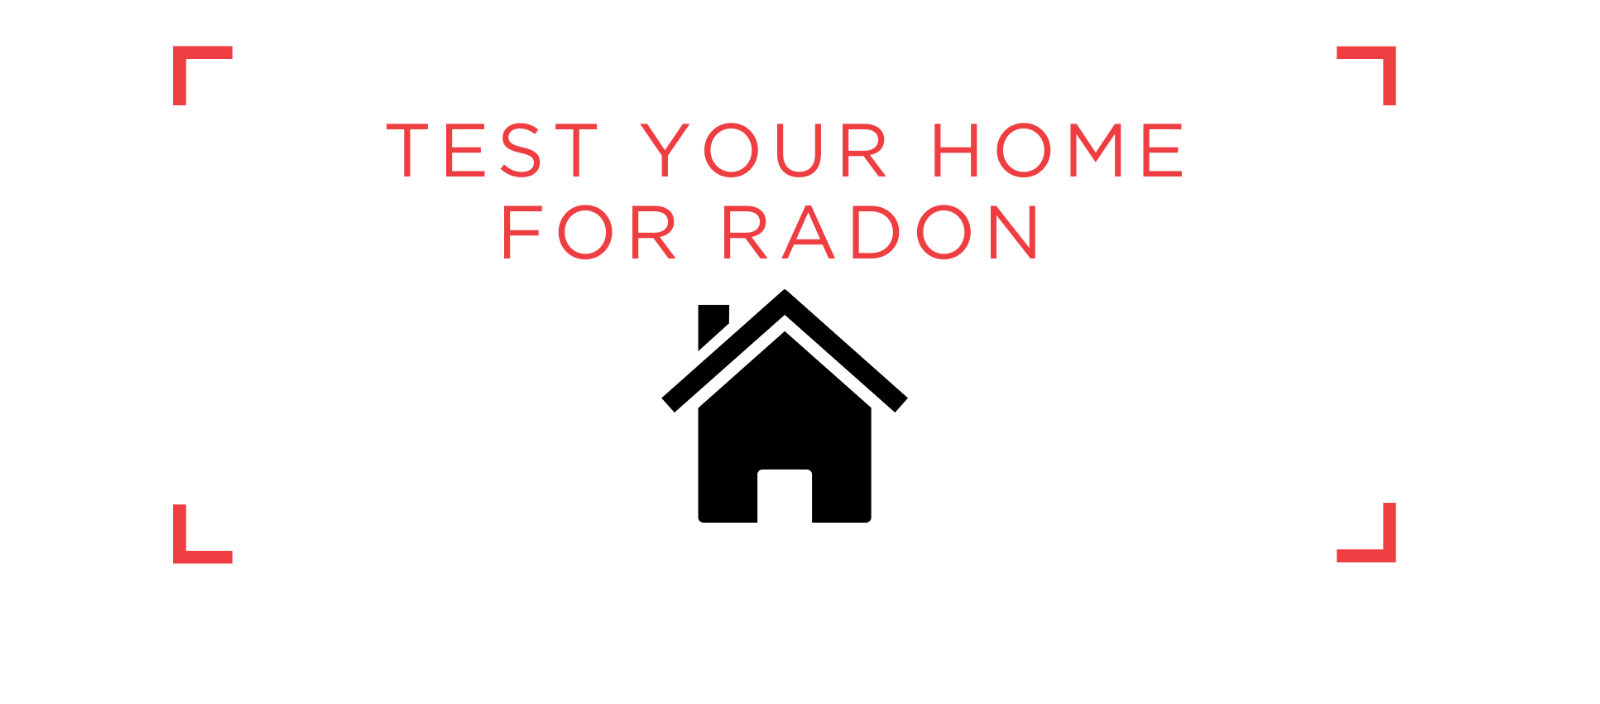 Test your home for radon